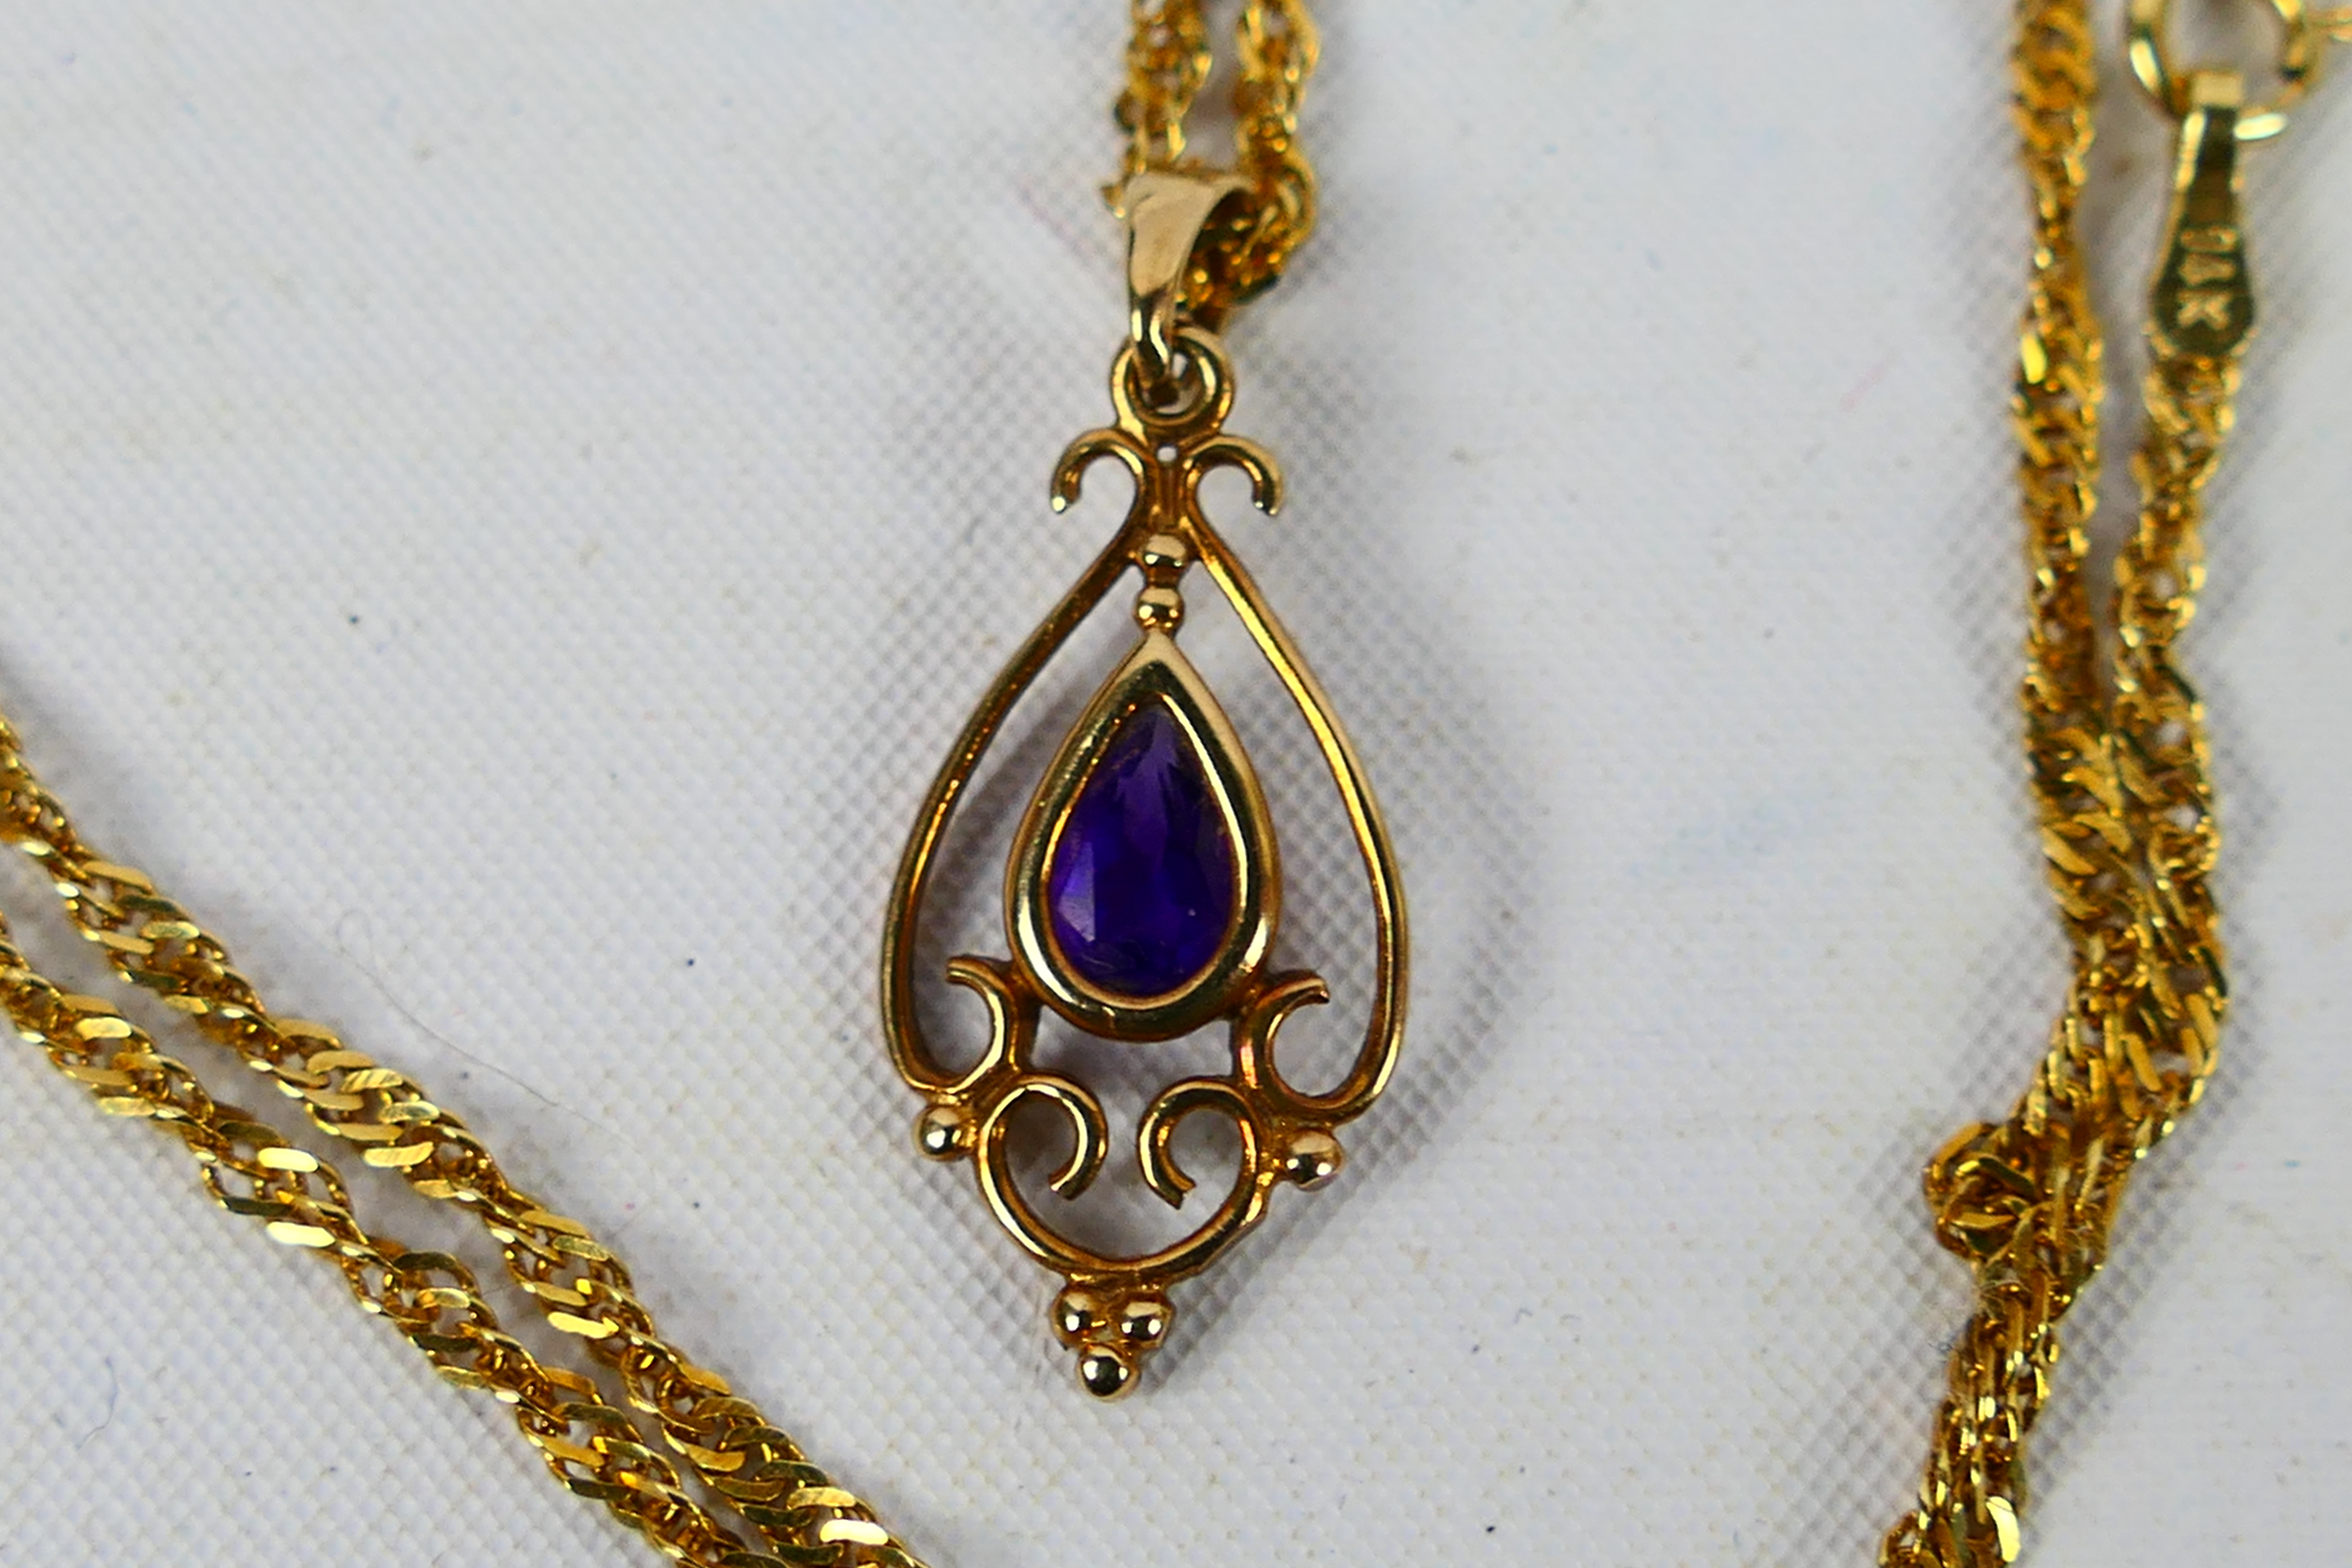 A rose metal pendant set with amethyst with chain stamped 14k, 40 cm (l), approximately 2. - Image 2 of 3